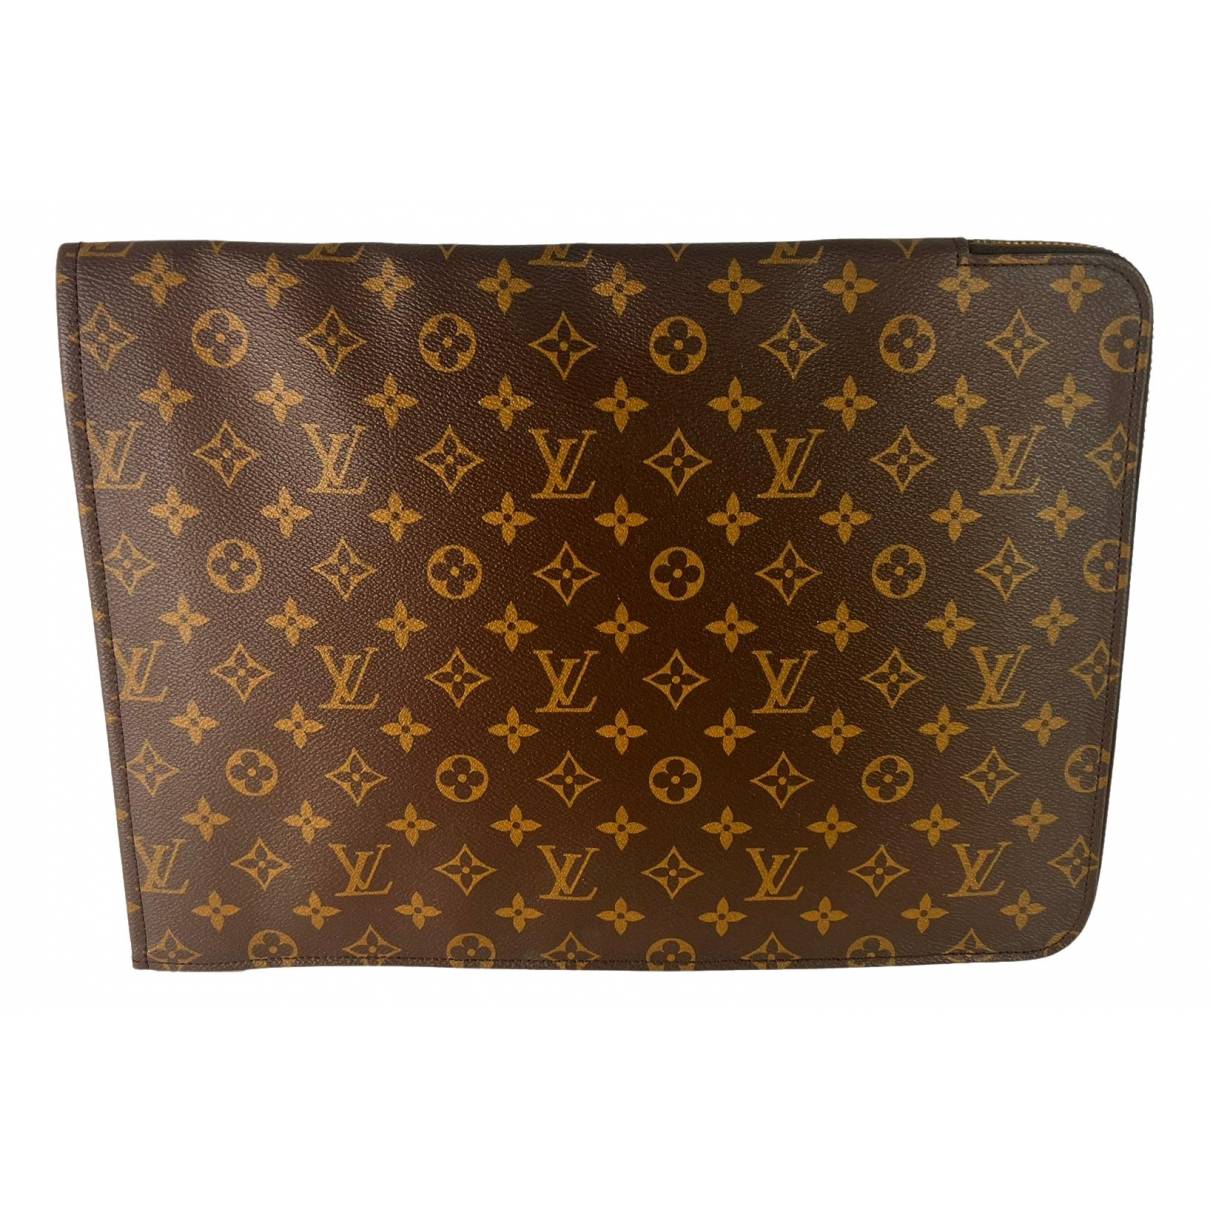 FAKE Louis Vuitton Neverfull Clutch [REVIEW] 